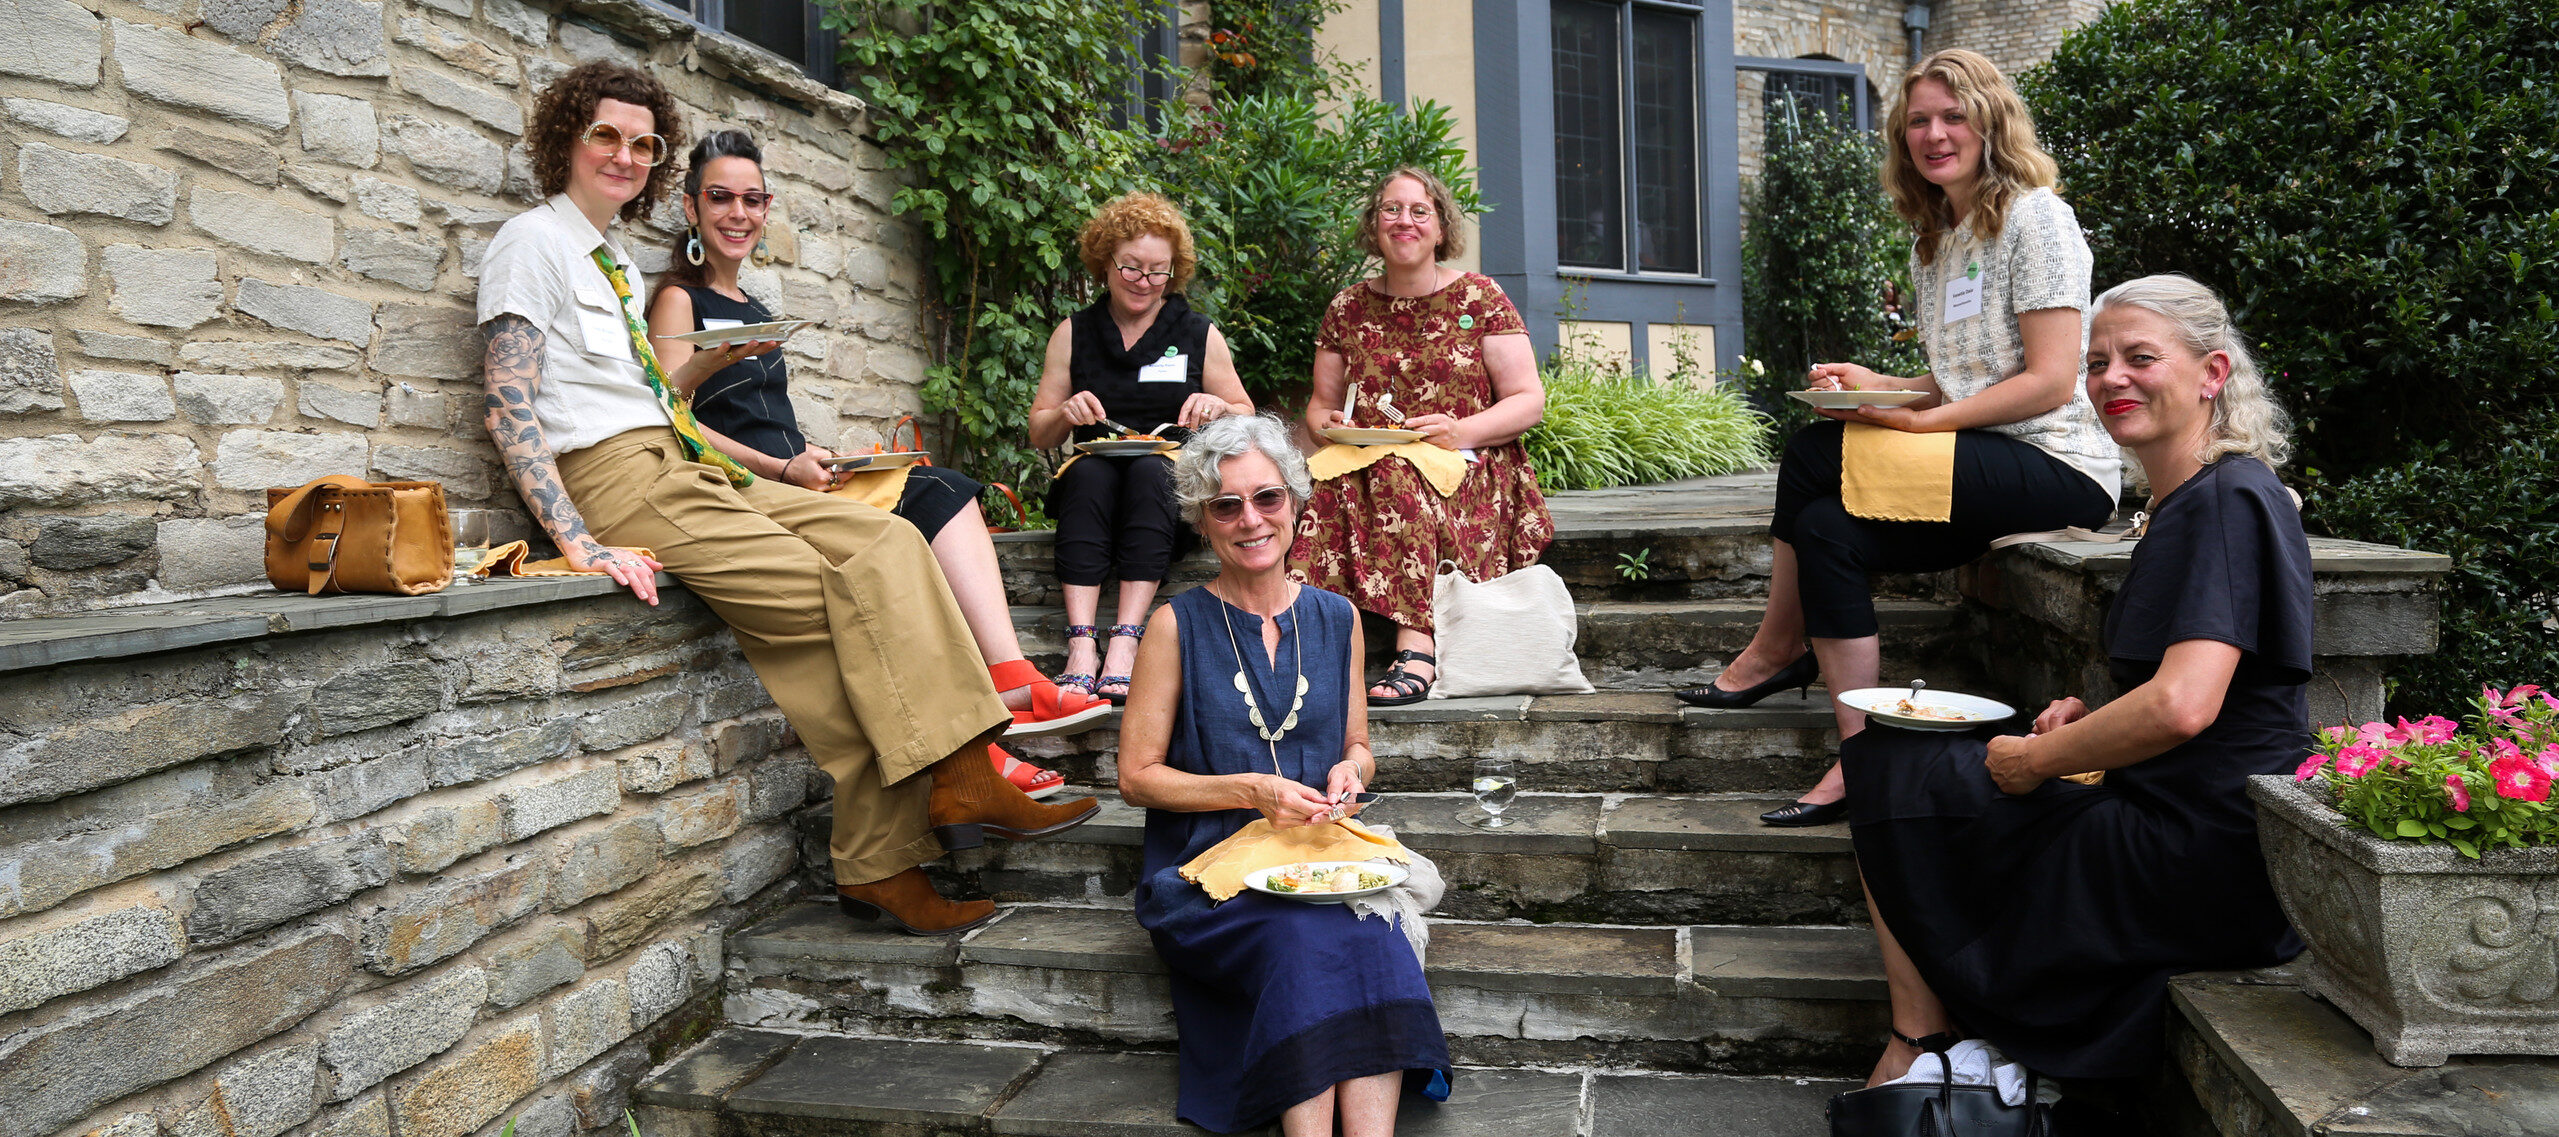 A photograph of seven light skinned women seated on stone steps eating lunch with plates and napkins in their laps. The women are looking at the camera and smiling. There is a Tudor style home in the background.